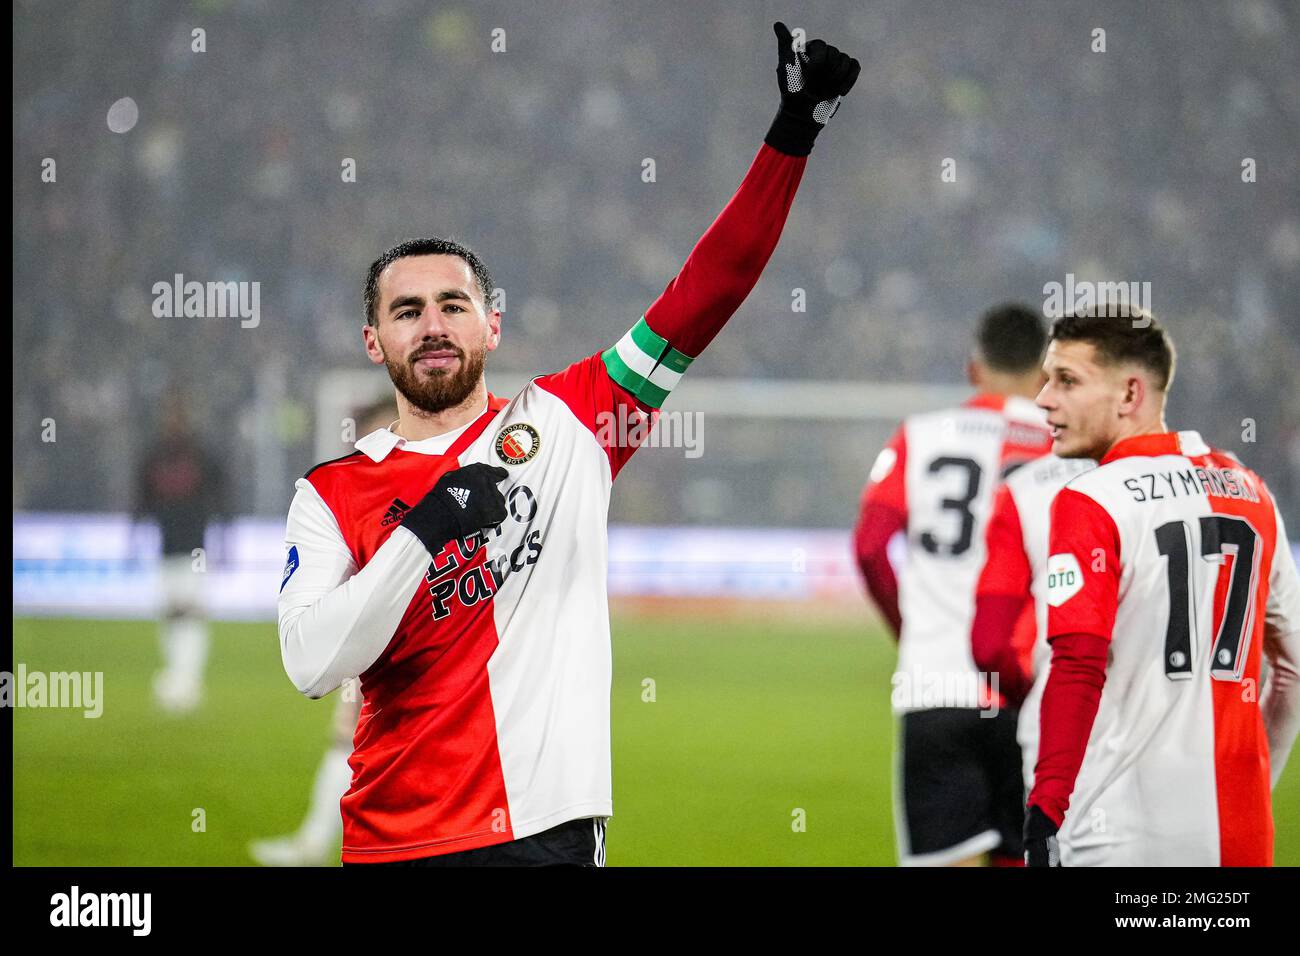 Rotterdam - Orkun Kokcu of Feyenoord celebrates the 2-0 during the match between Feyenoord v NEC Nijmegen at Stadion Feijenoord De Kuip on 25 January 2023 in Rotterdam, Netherlands. (Box to Box Pictures/Tom Bode) Stock Photo